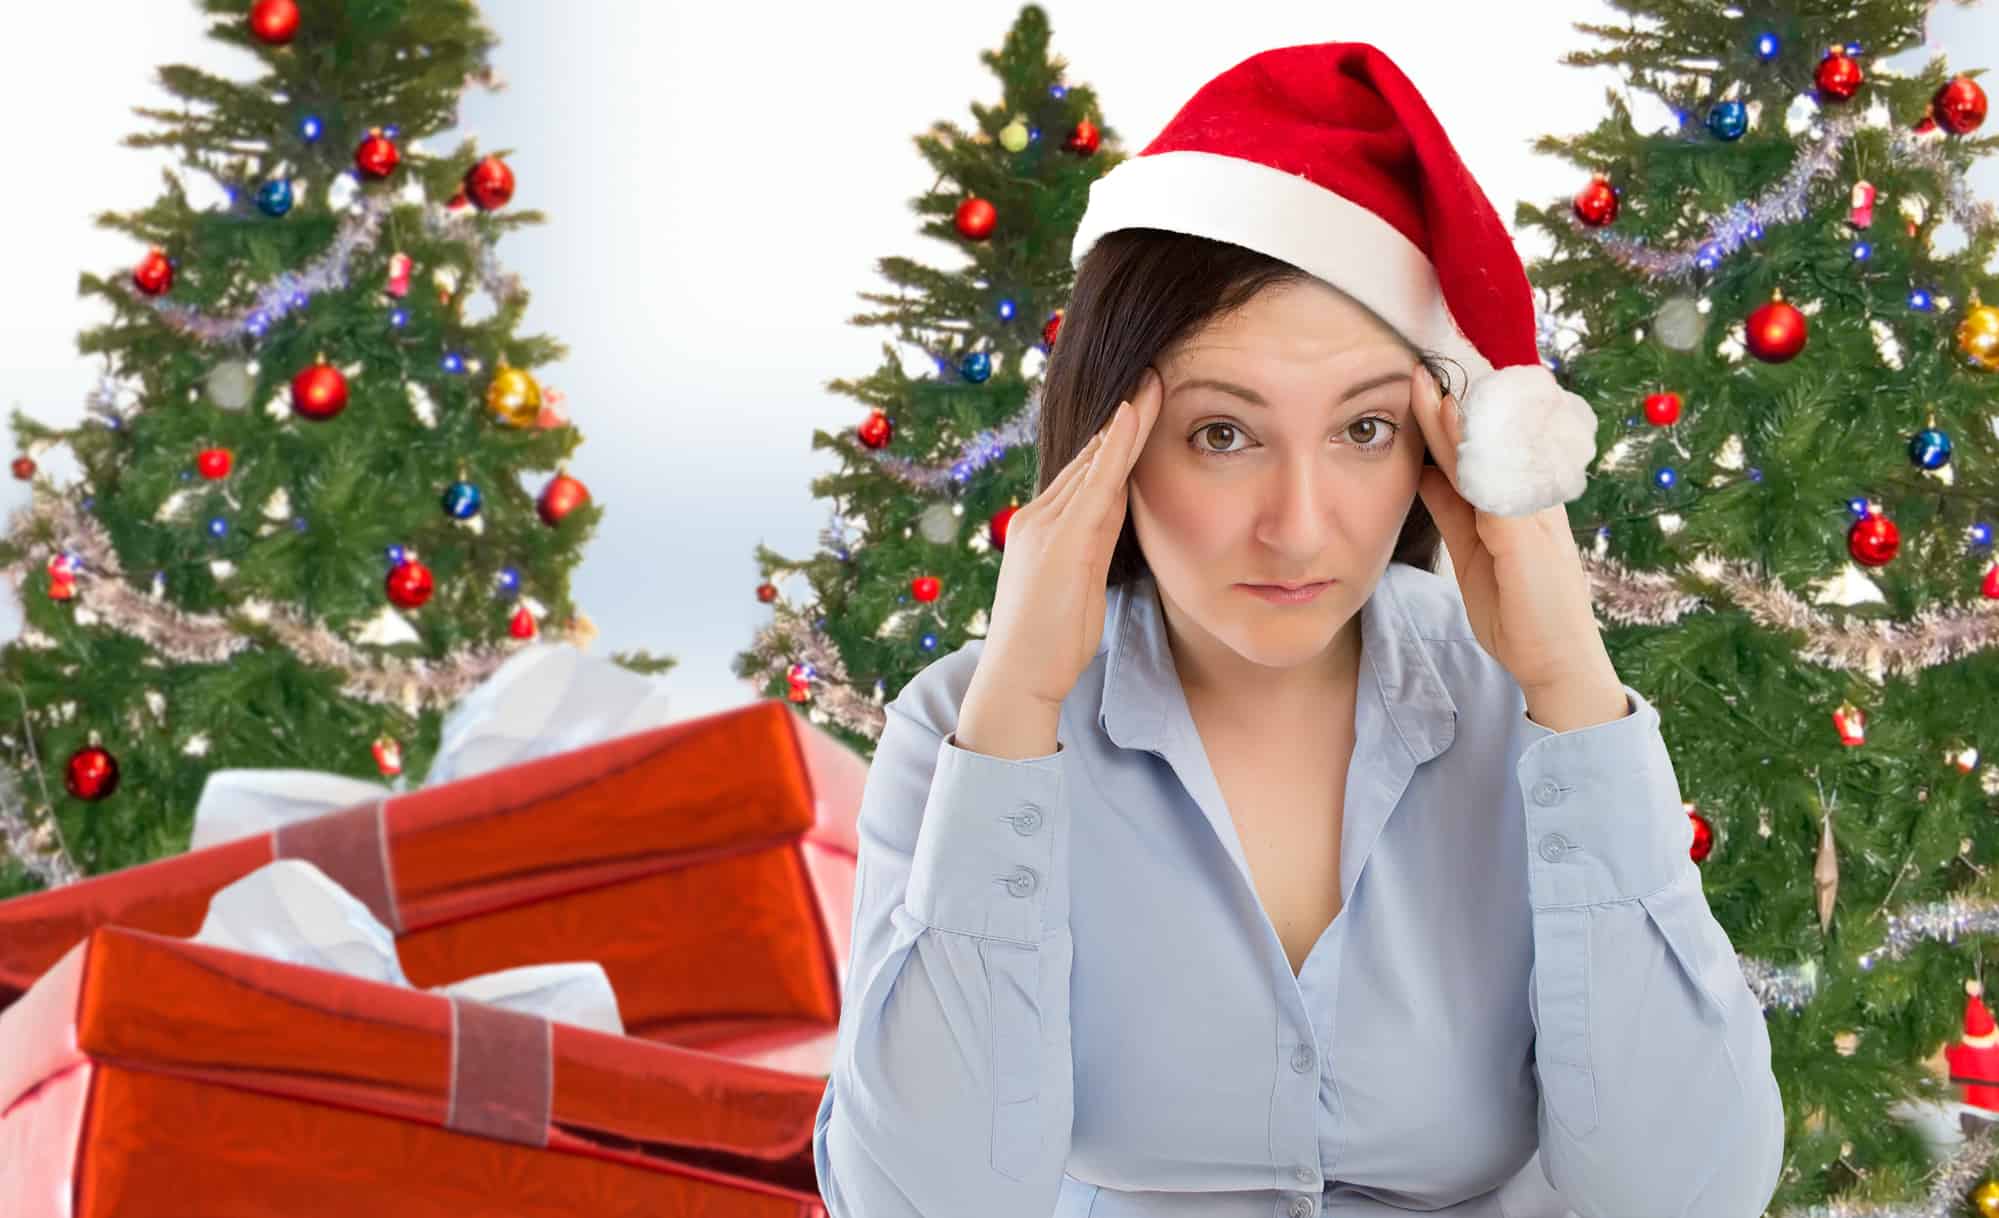 Holidays are meant for the HEART, Not HEART ATTACKS 3 Simple Steps to Reduce the Effects of Holiday Stress